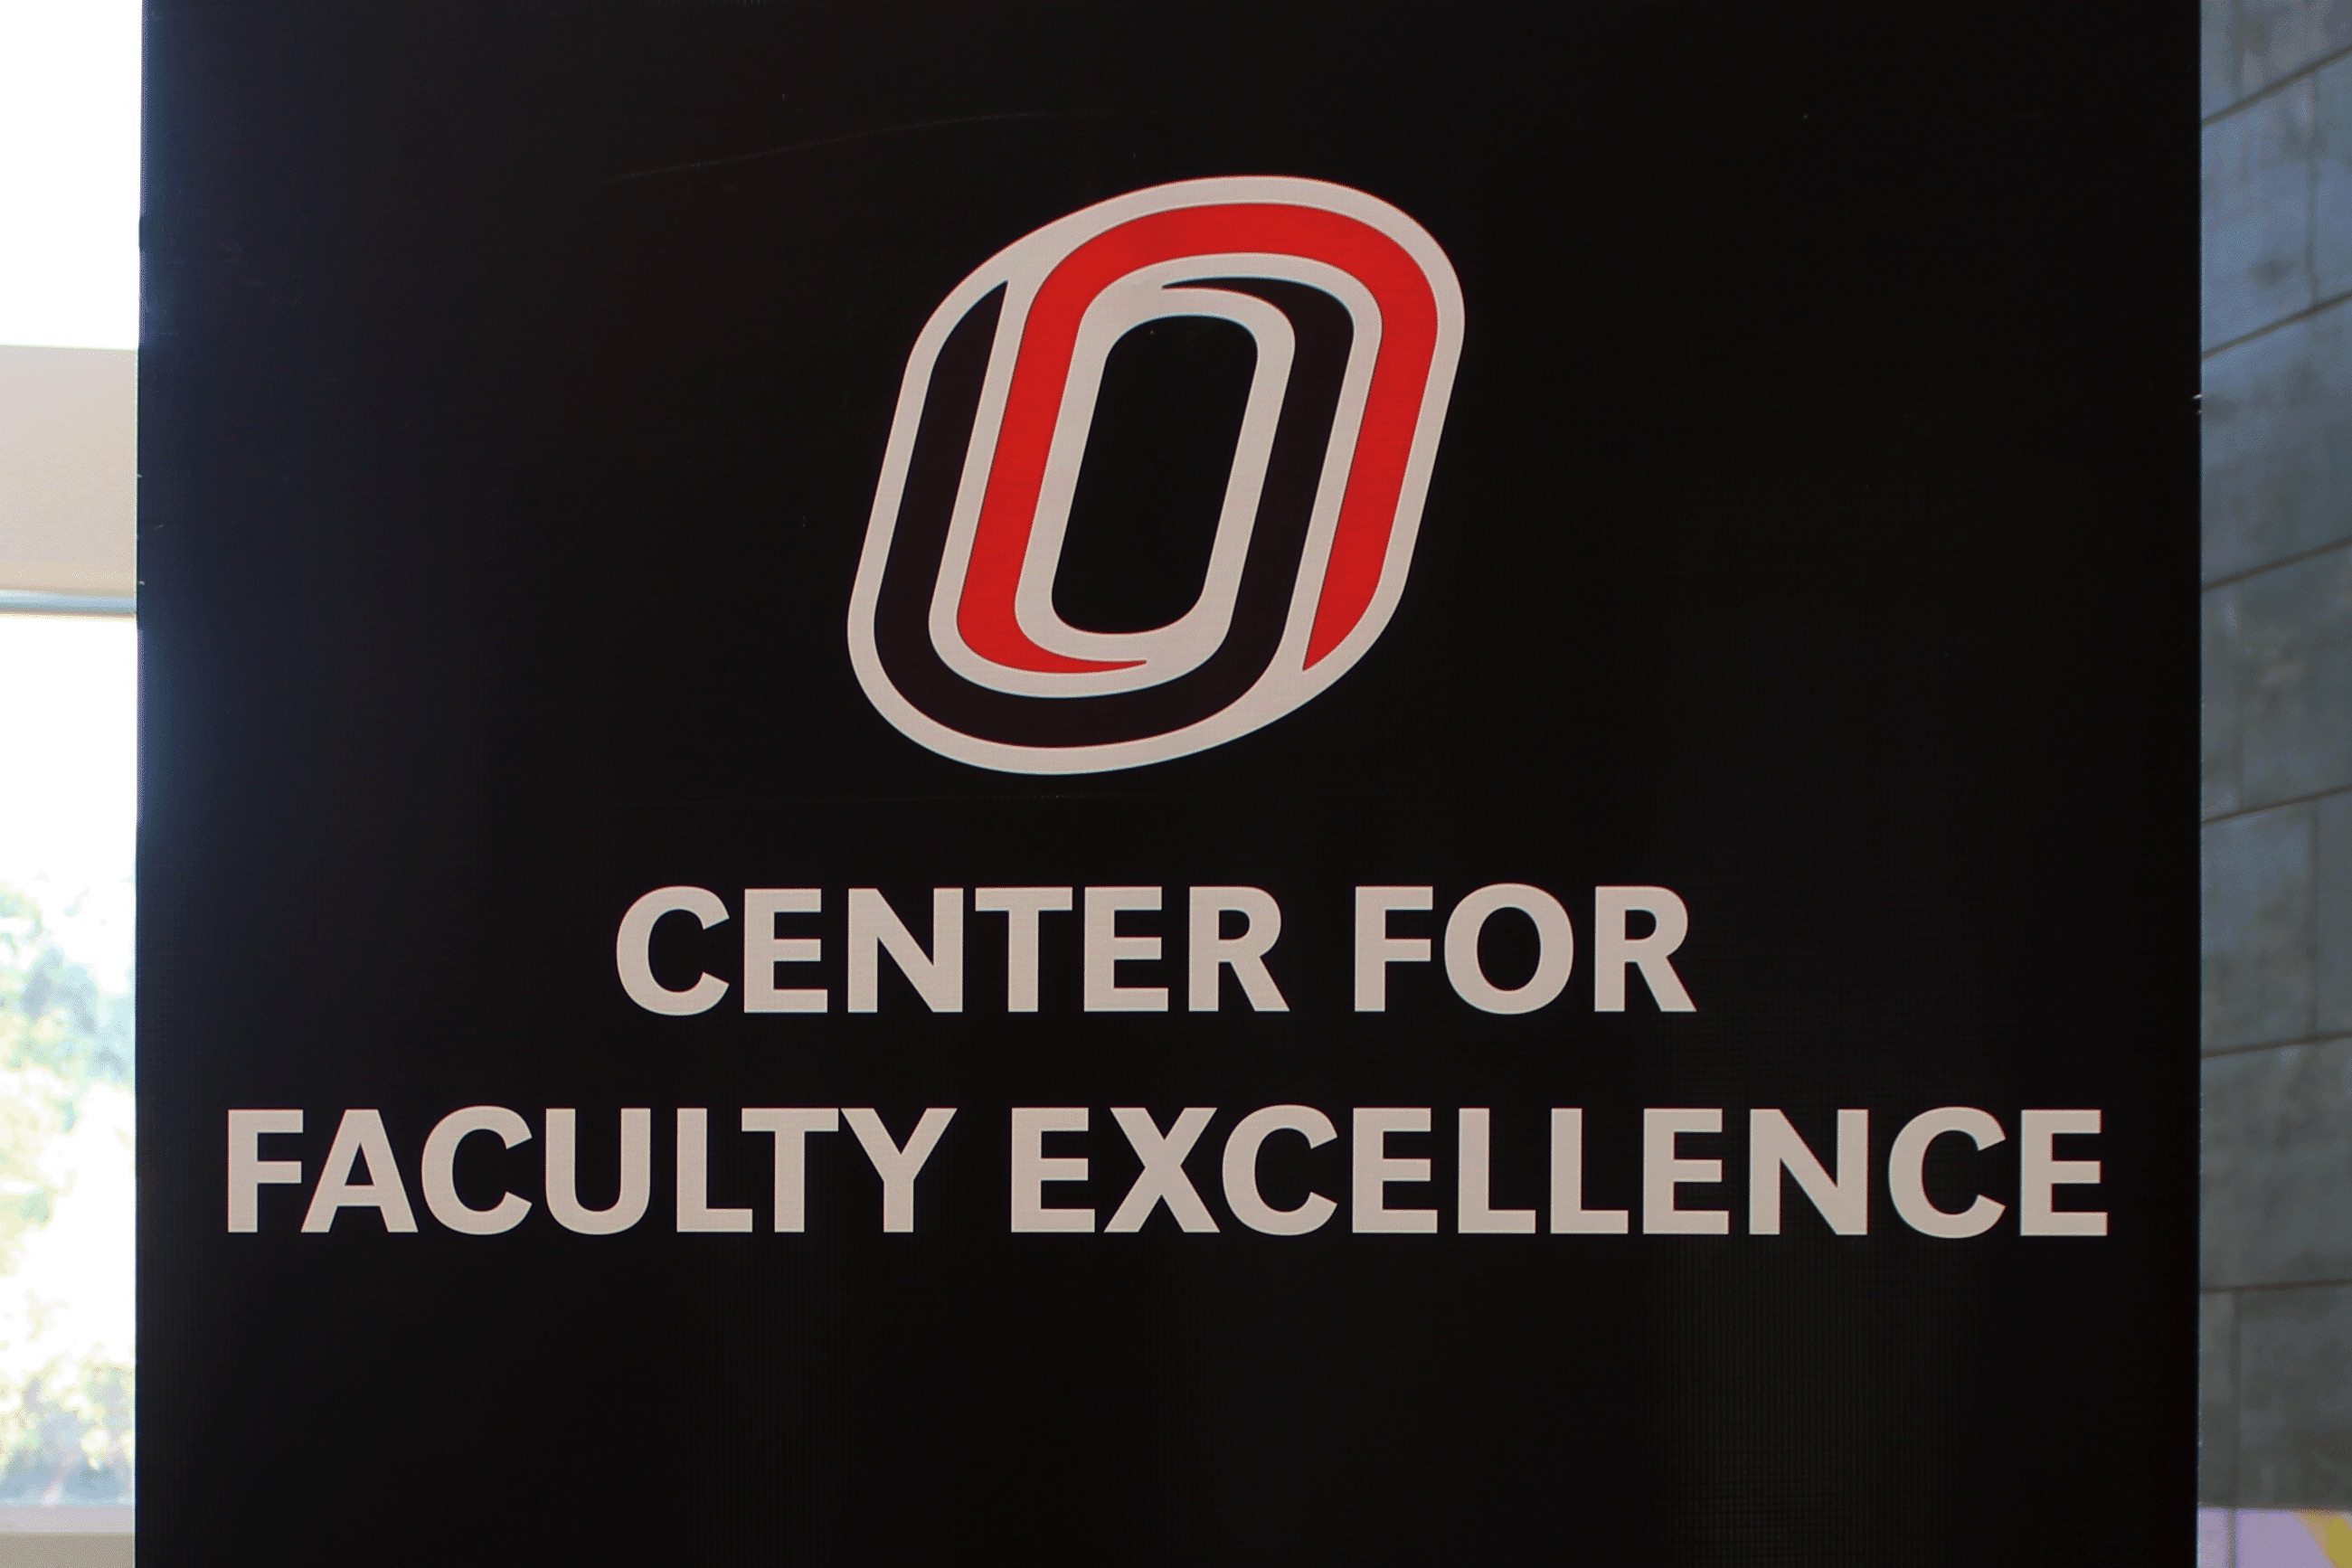 Center for Faculty Excellence banner with "O" Logo